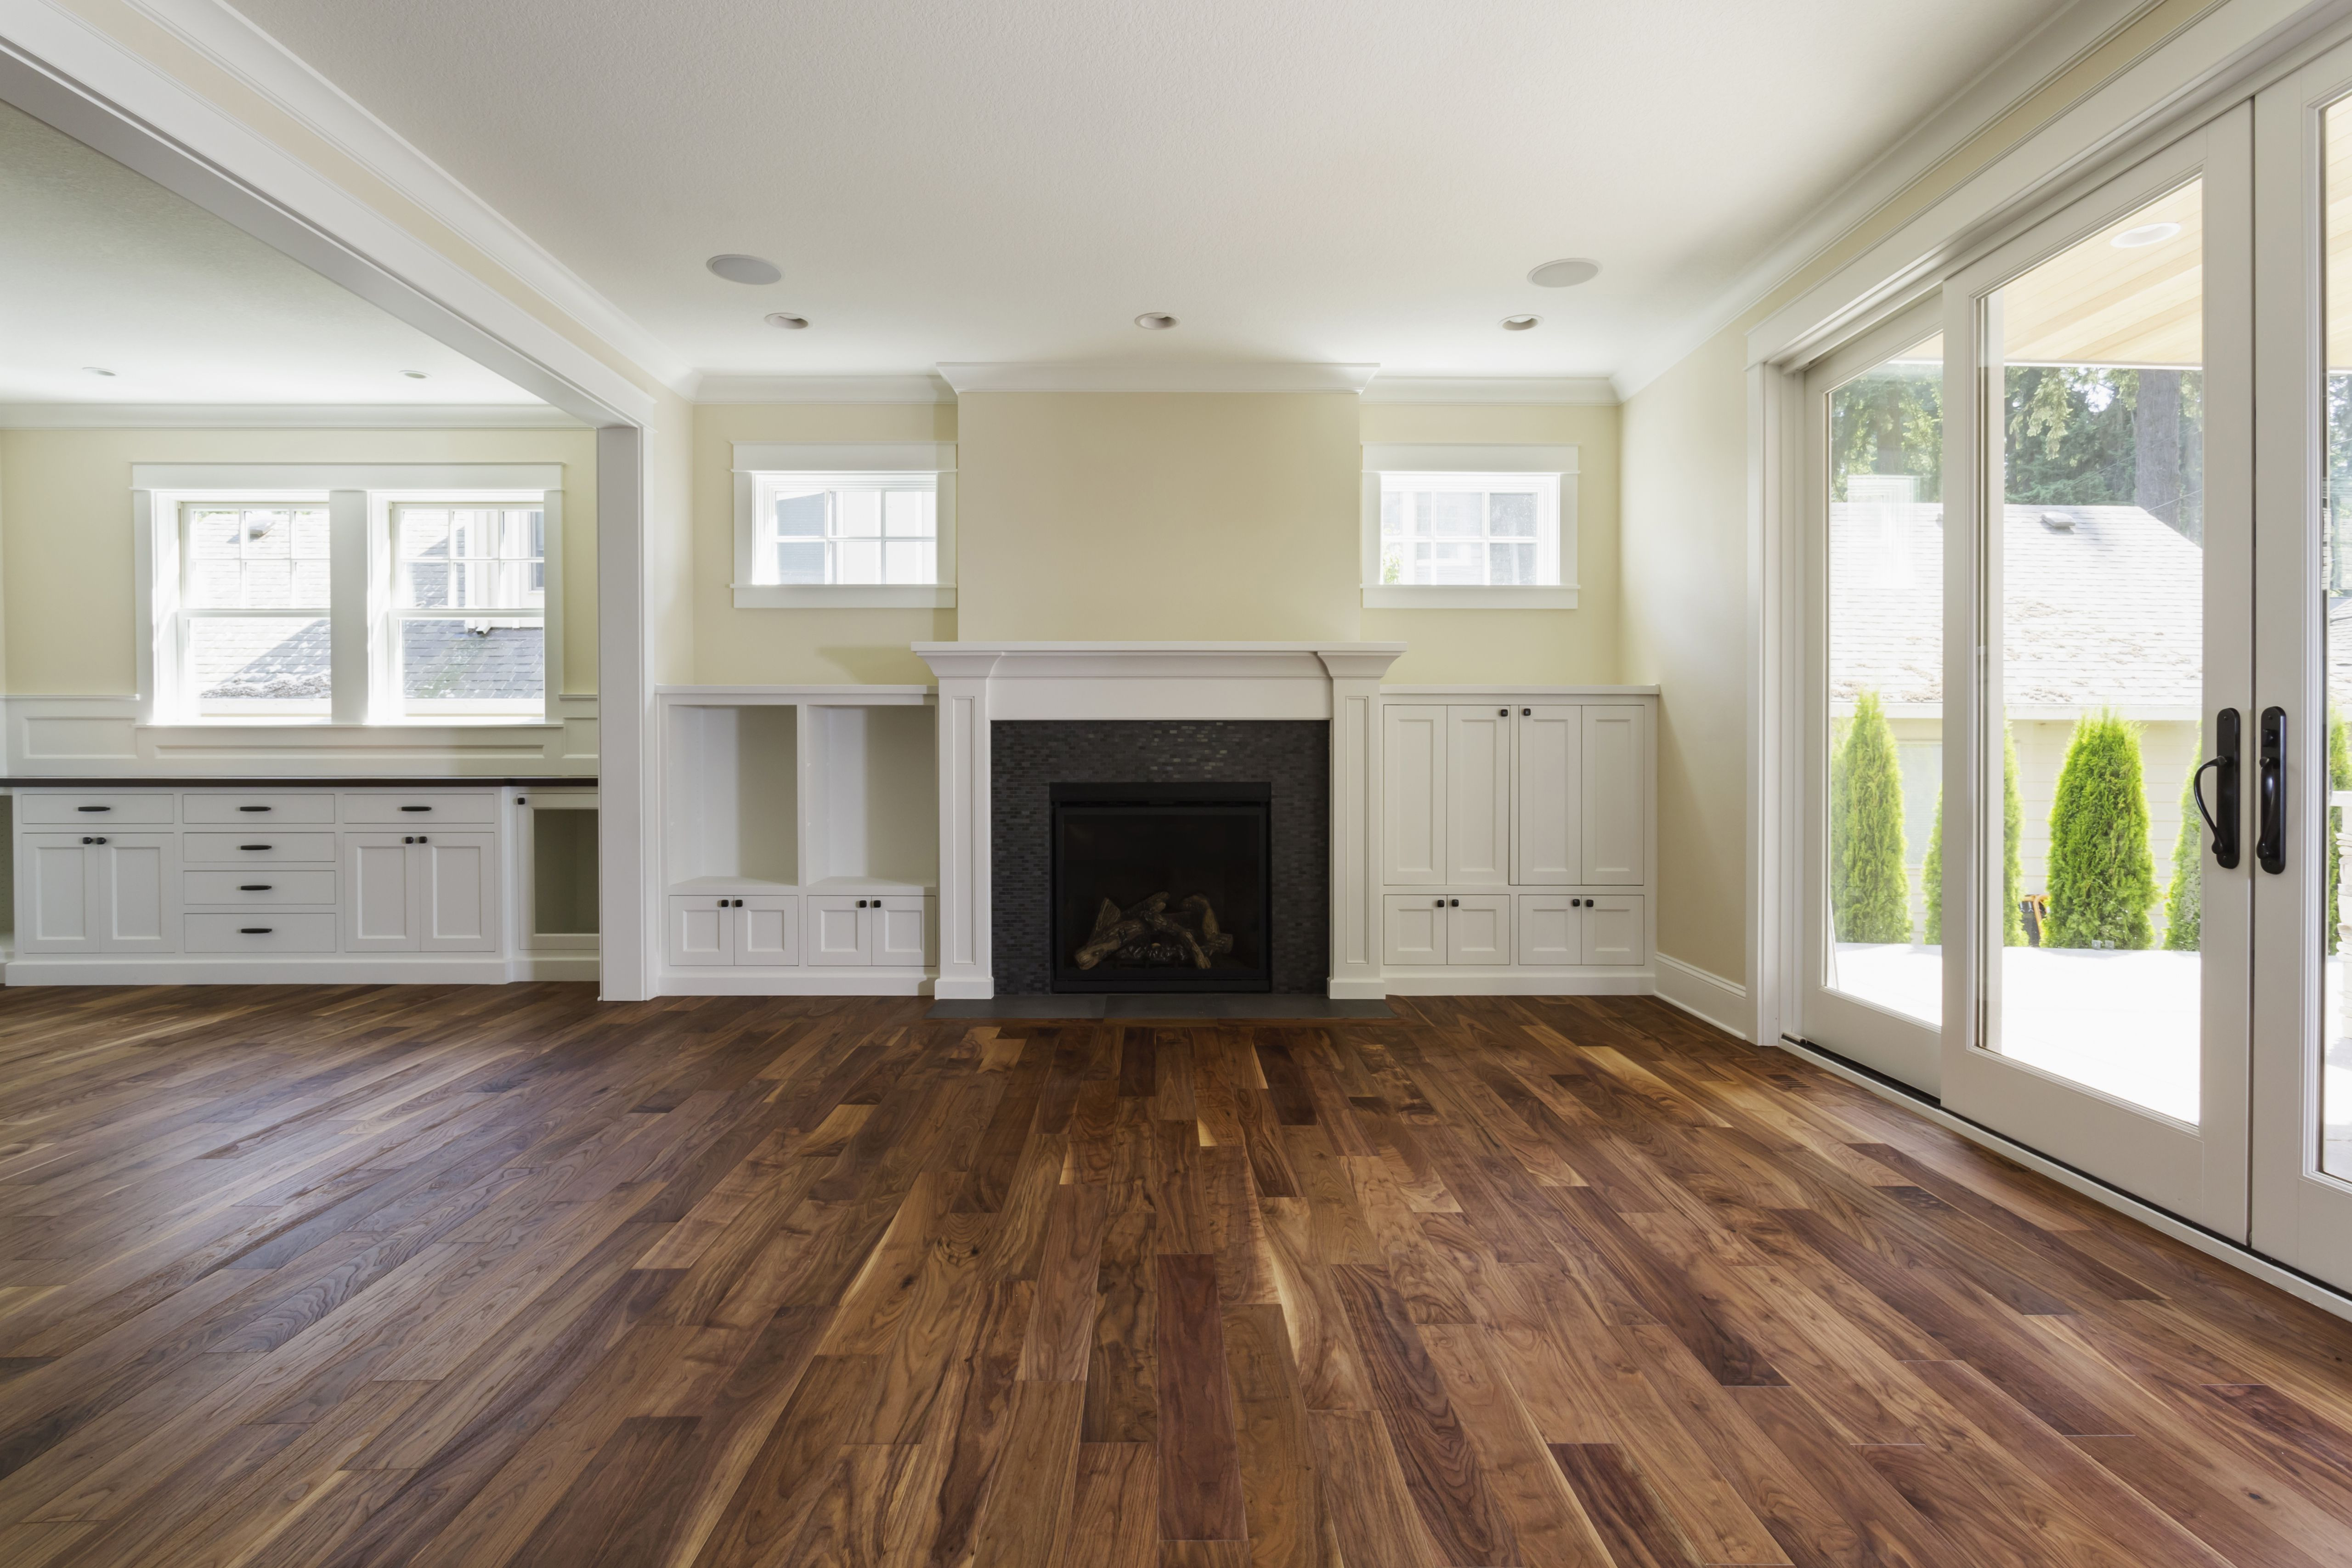 11 Popular How Much It Cost to Install Hardwood Floor 2024 free download how much it cost to install hardwood floor of the pros and cons of prefinished hardwood flooring intended for fireplace and built in shelves in living room 482143011 57bef8e33df78cc16e035397